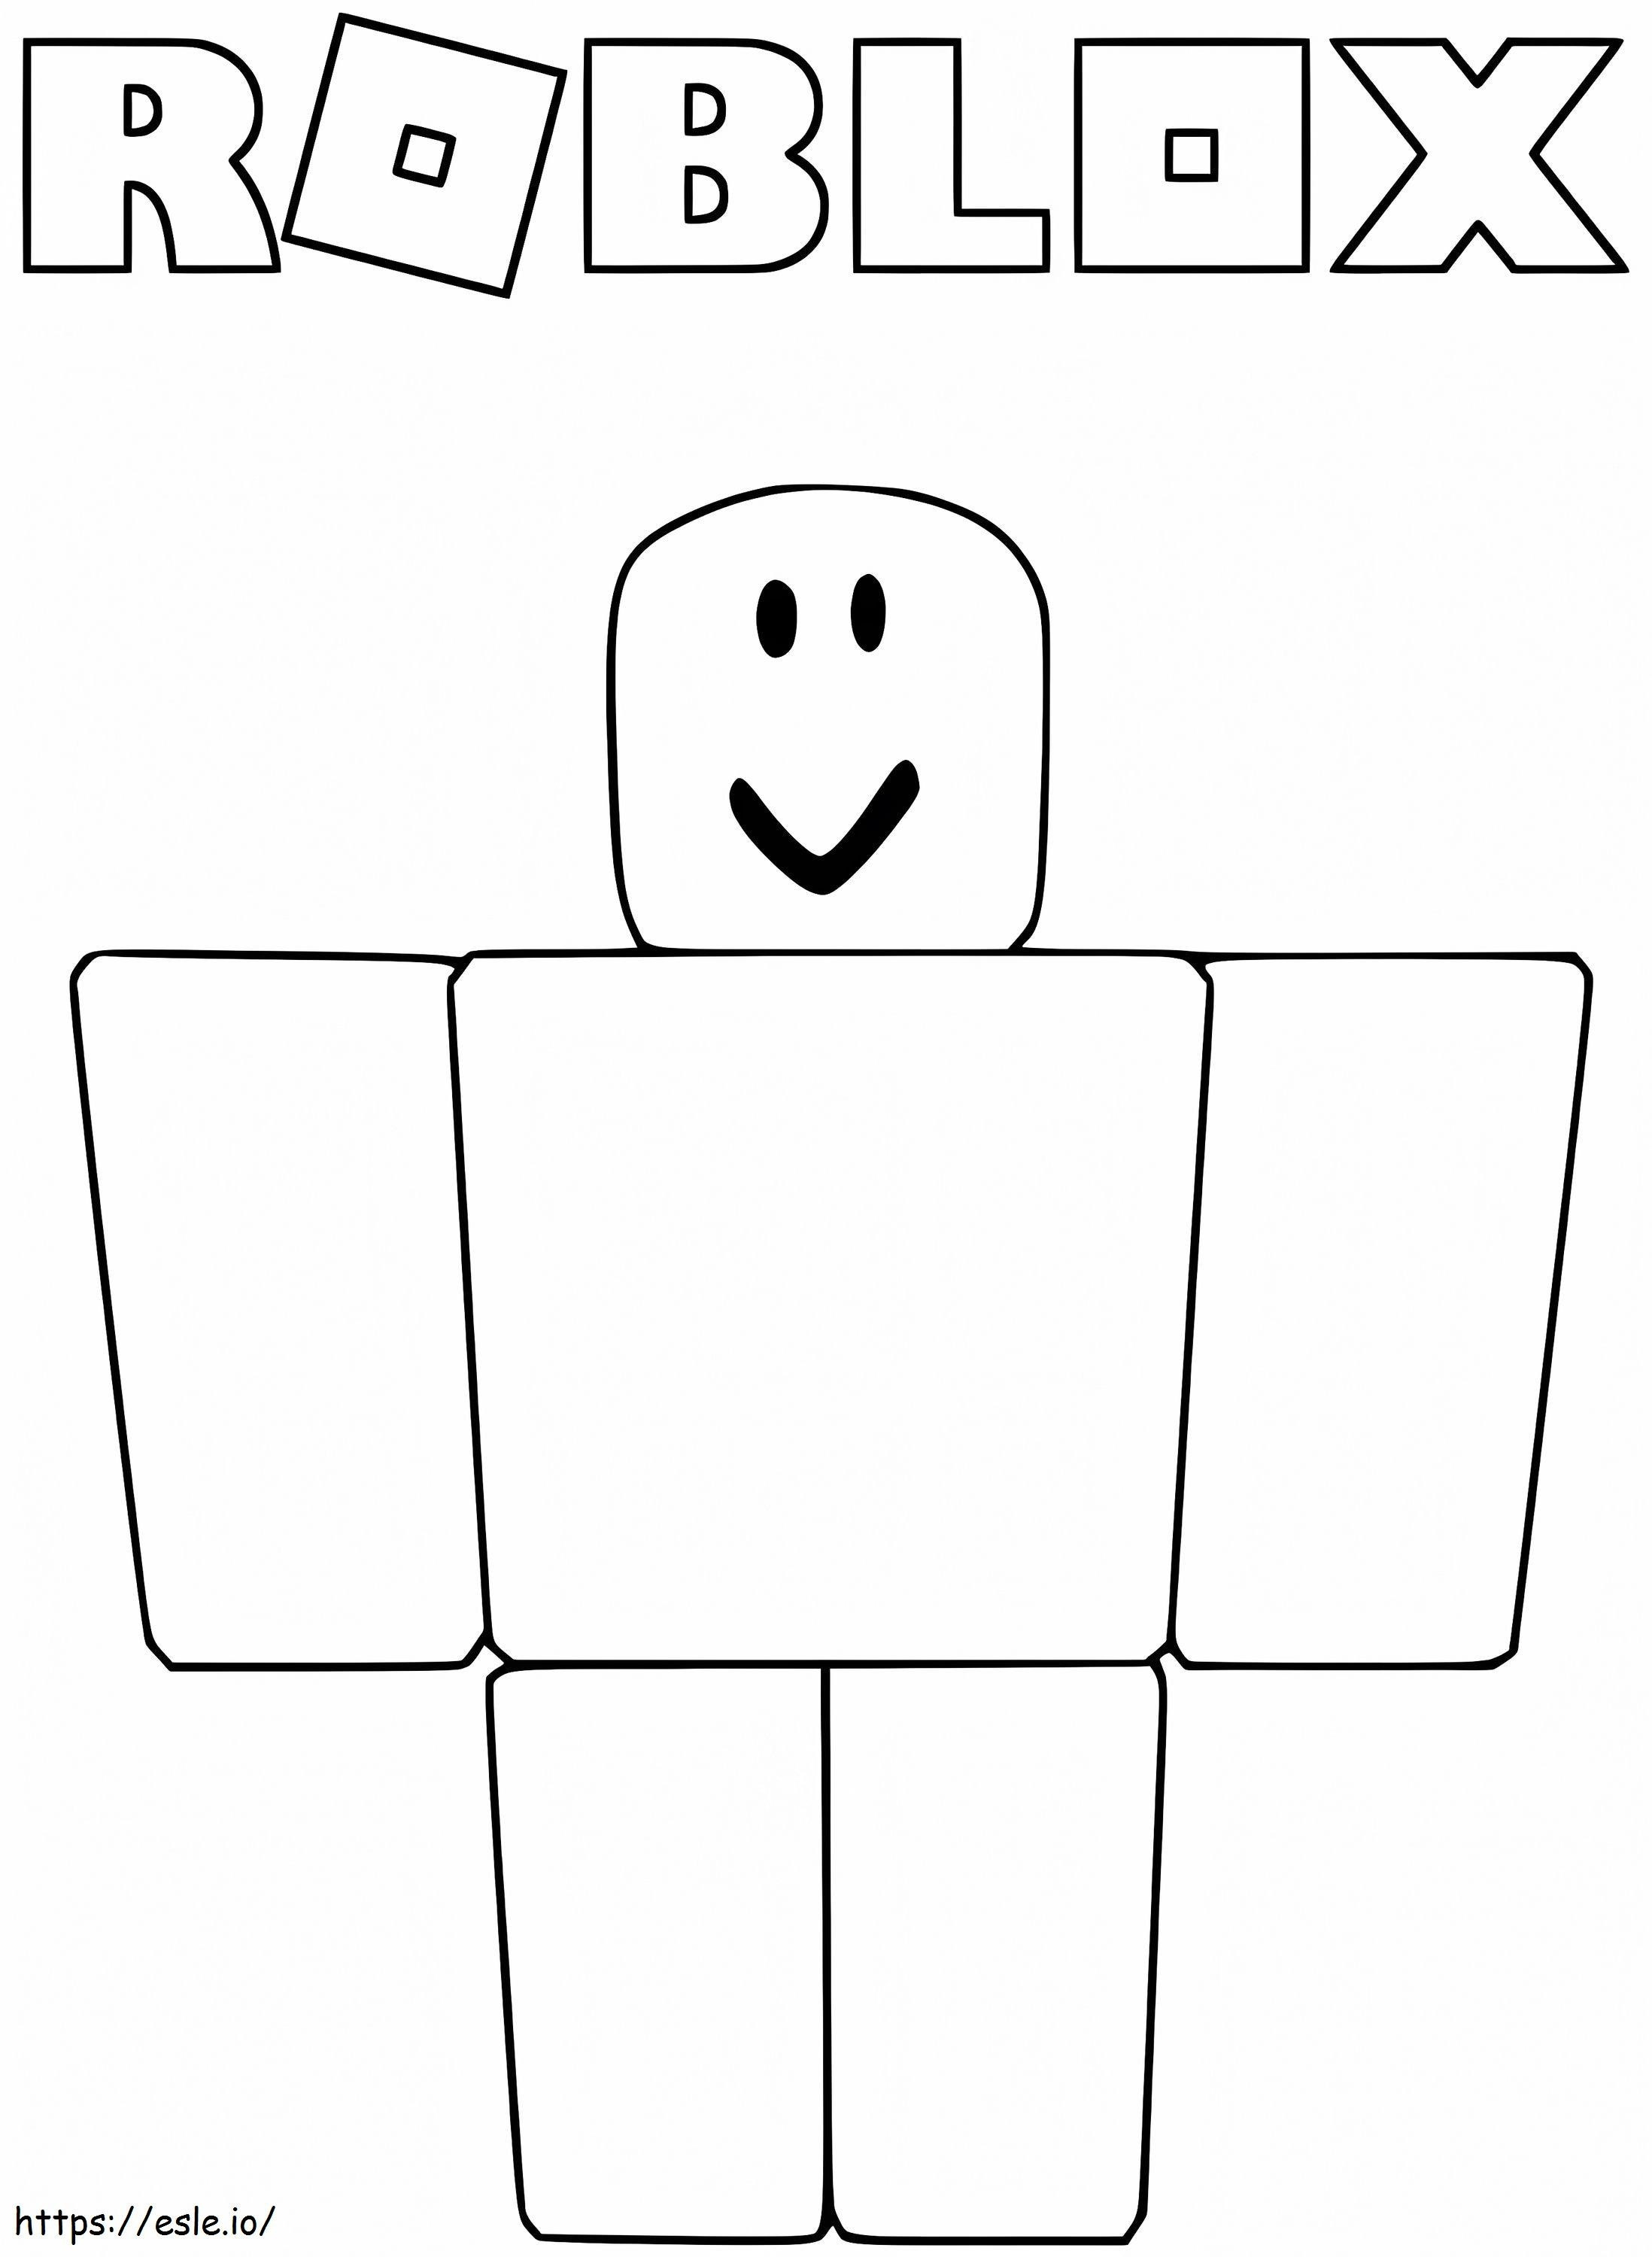 Simple Roblox coloring page